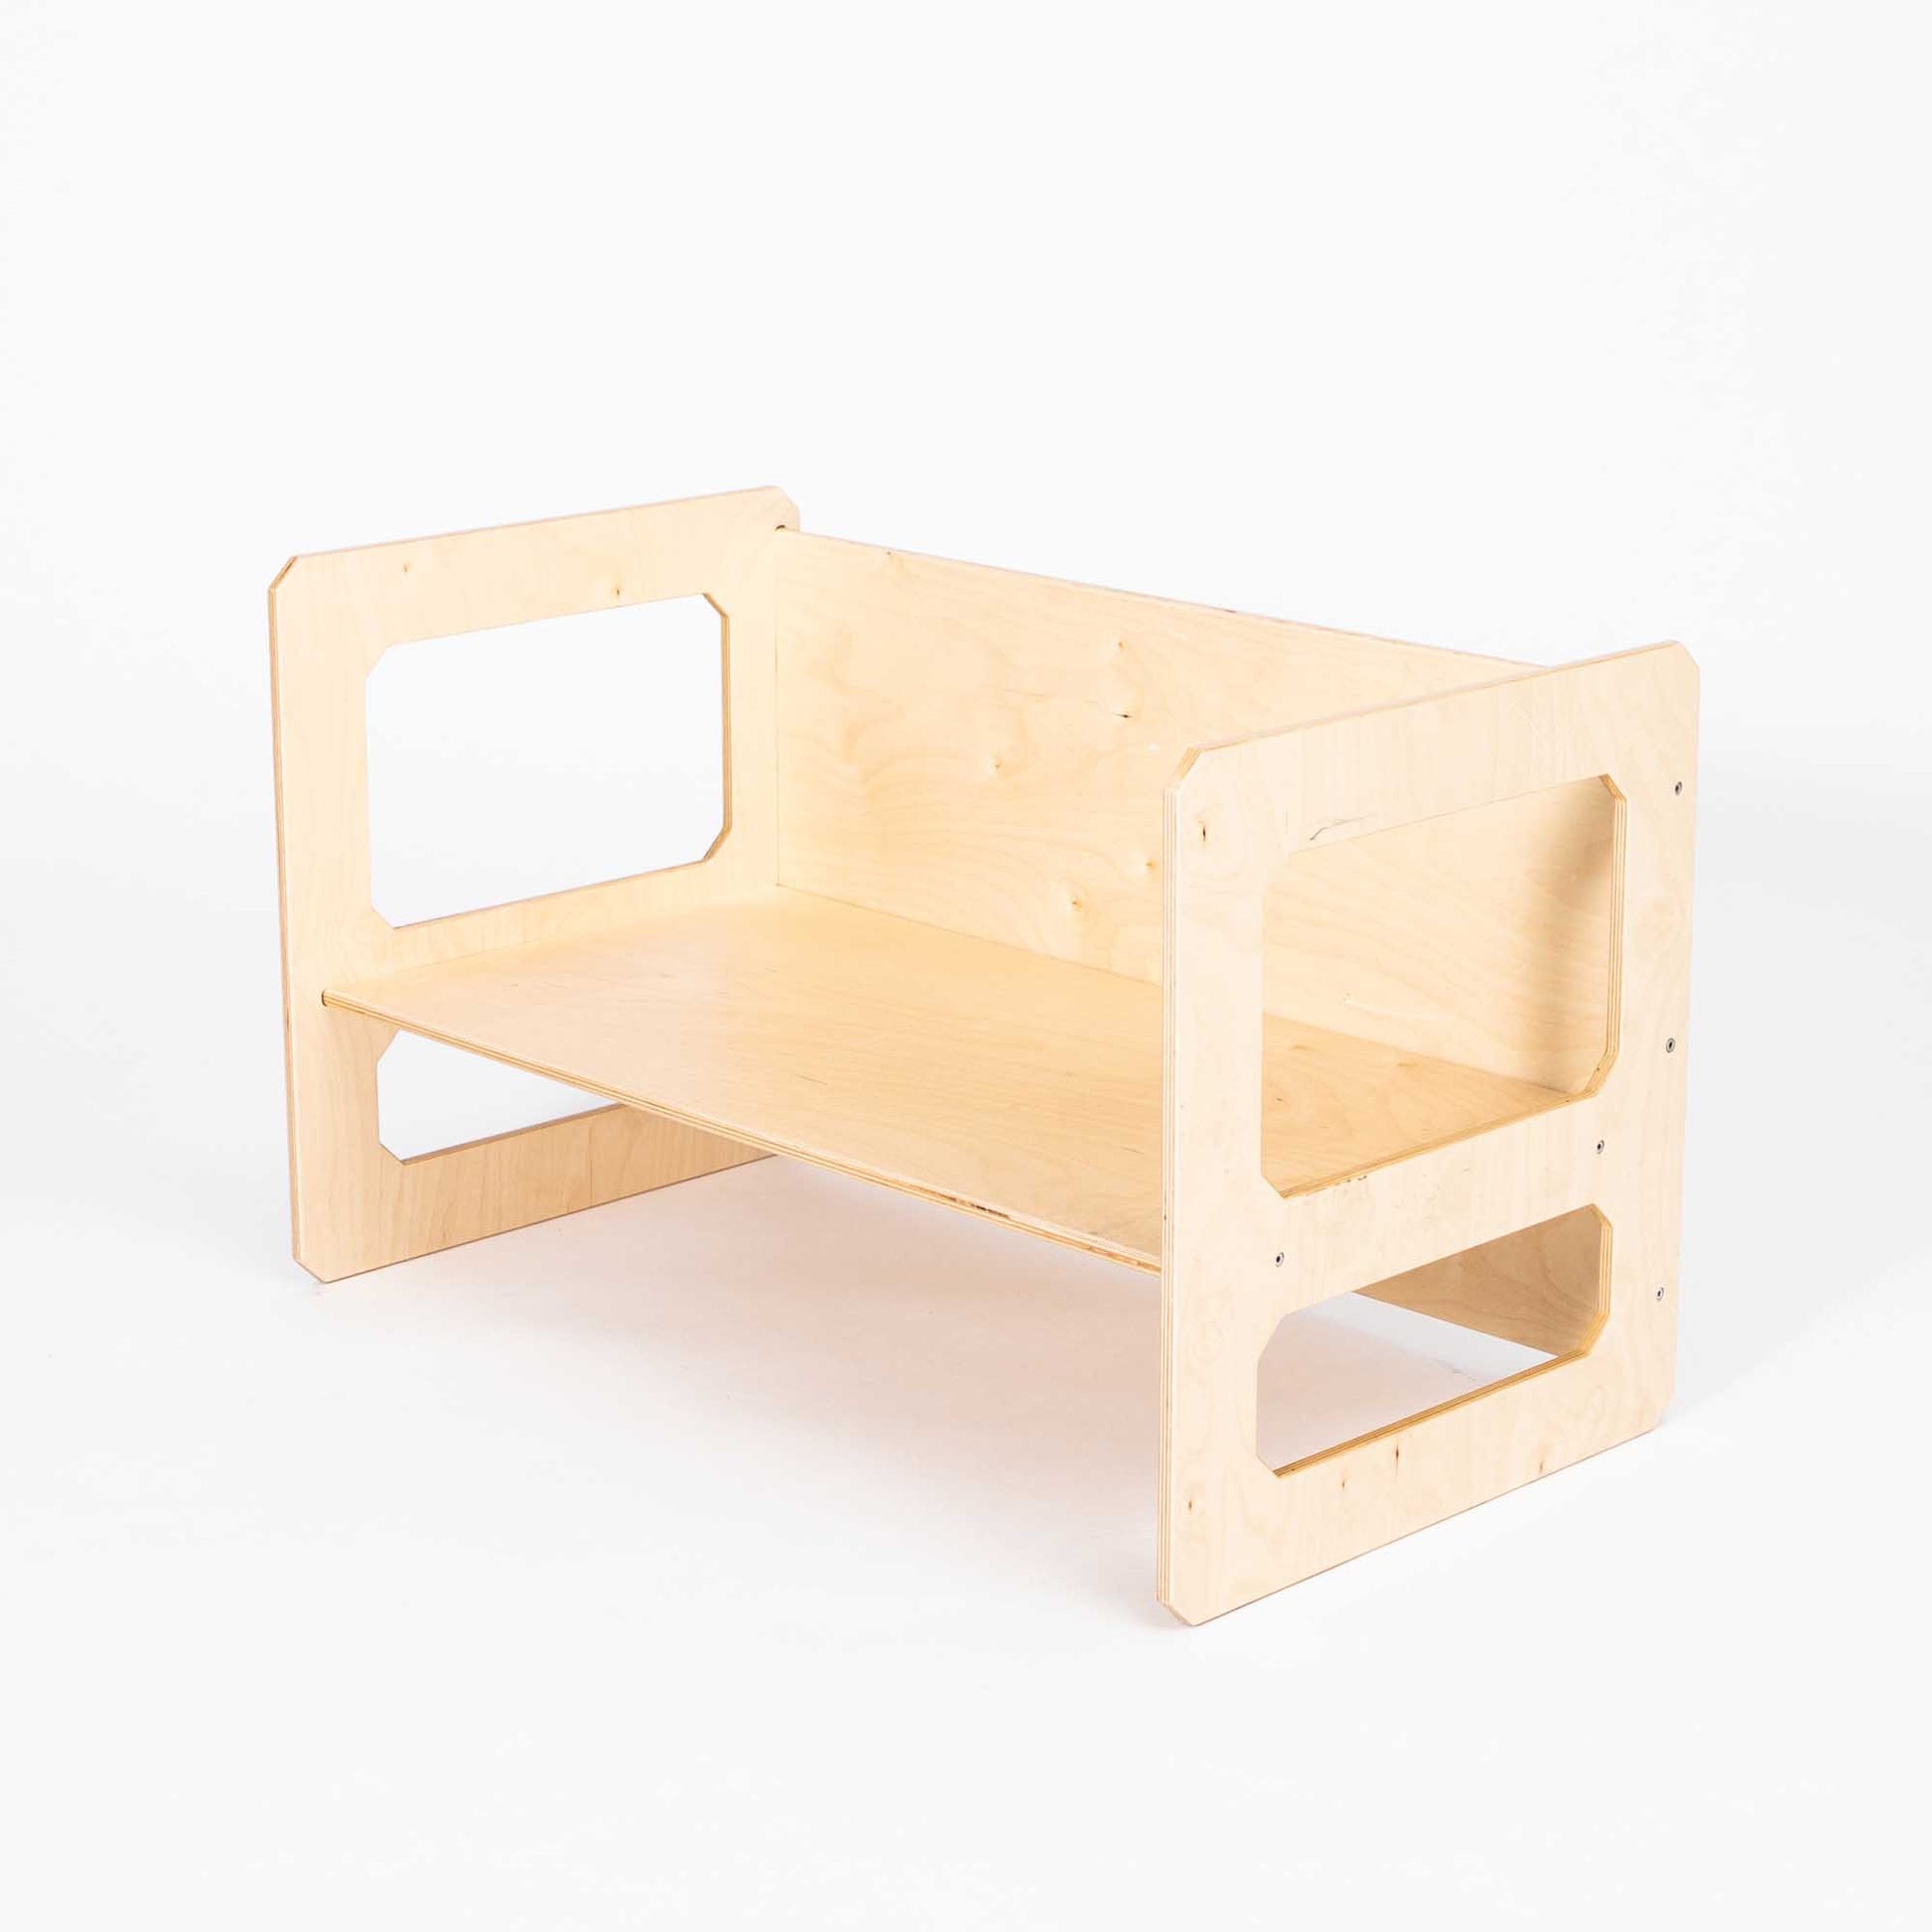 A Montessori weaning table with a shelf on it, suitable as a children's desk or toddler table from Sweet Home From Wood.